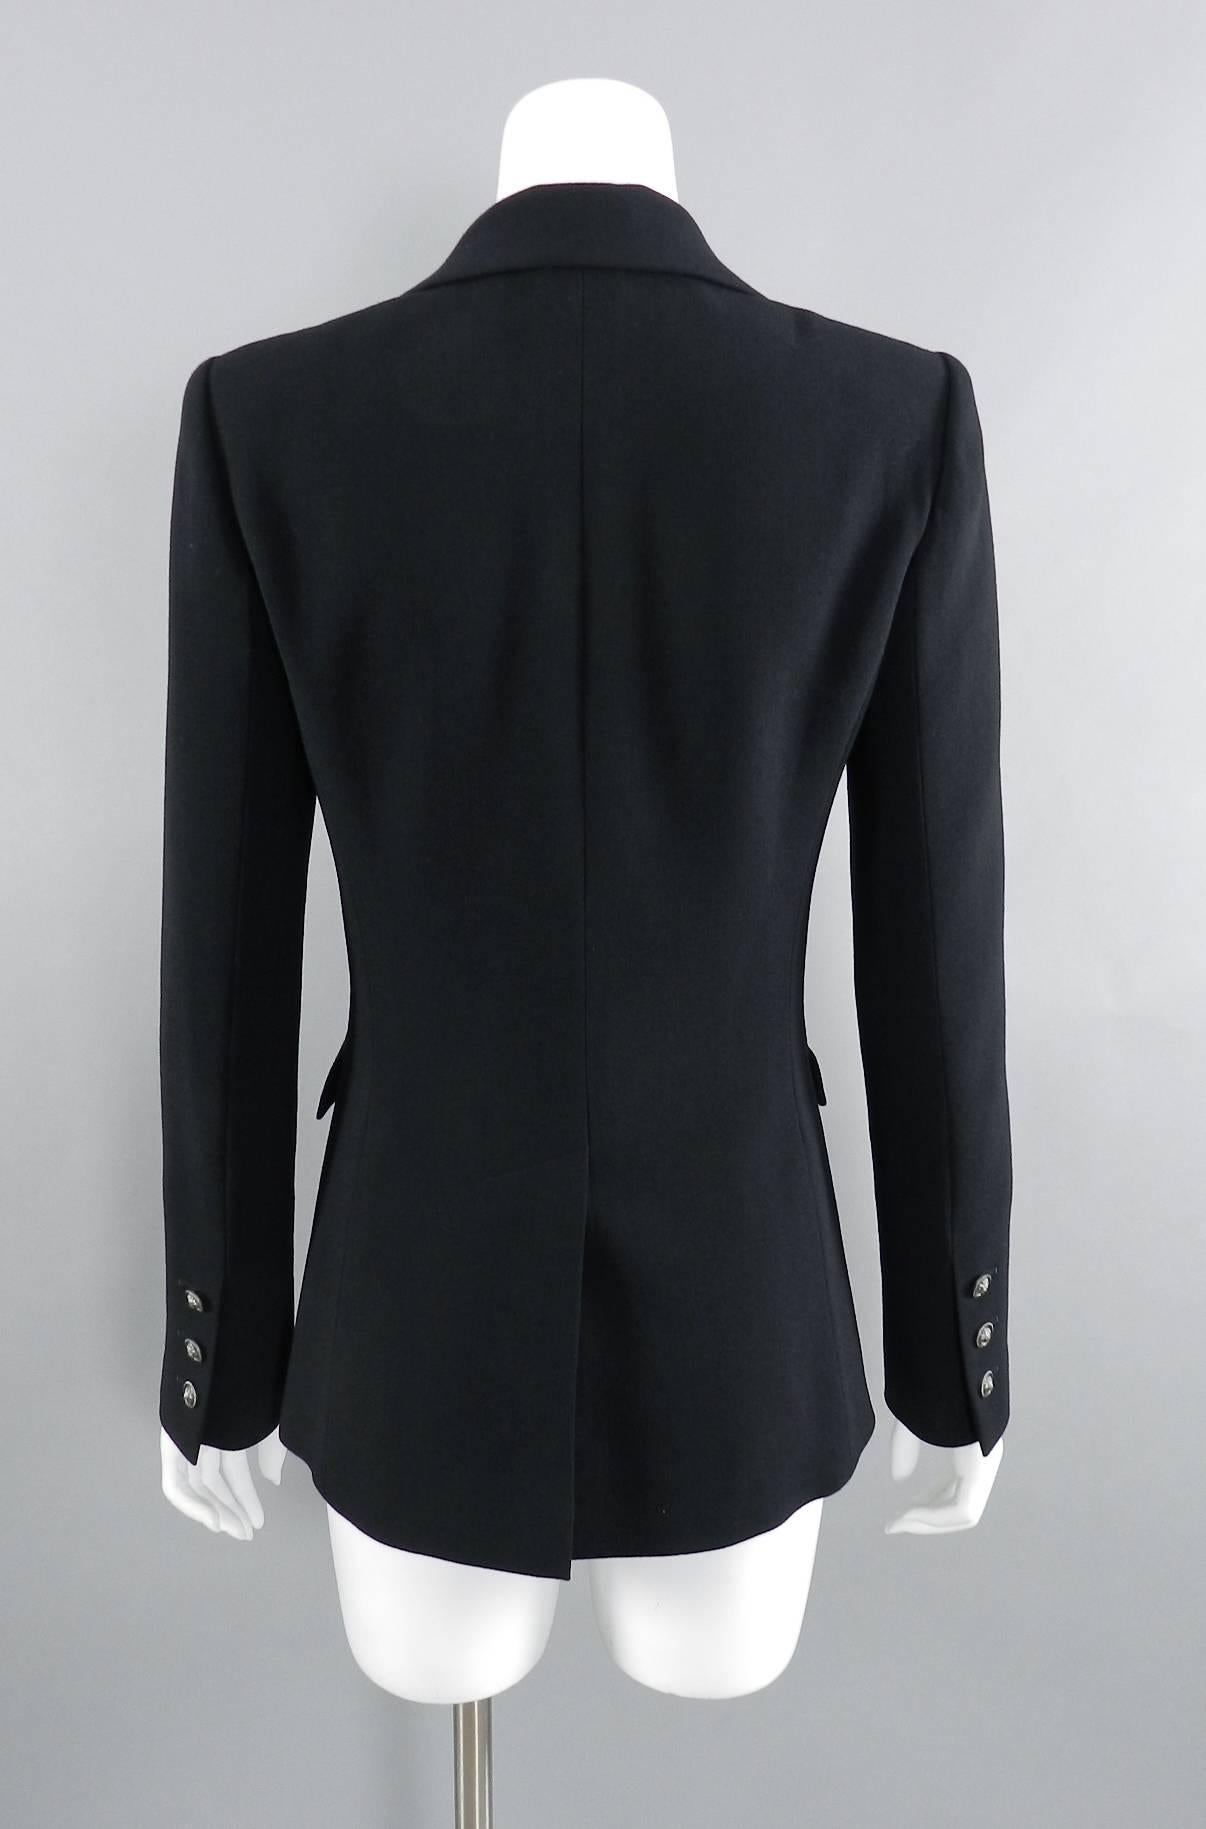 CHANEL 08A Fall 2008 Classic Black Wool Blazer Jacket with Lion Button 2